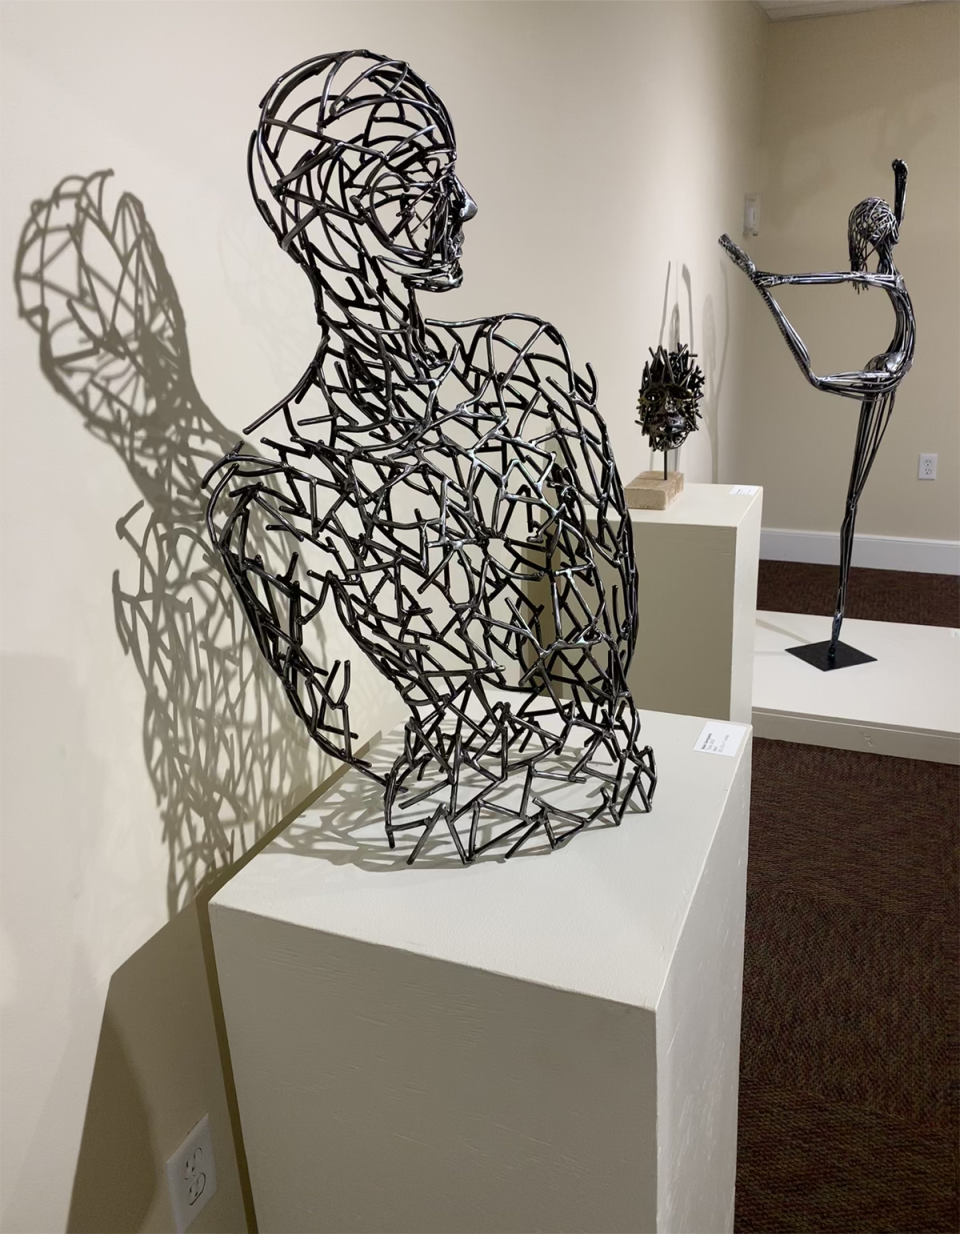 The Gadsen Arts Center & Museum is showing Mark Georgiades’ exhibit, Visage, which displays his welded metal sculptures of human faces and torsos,